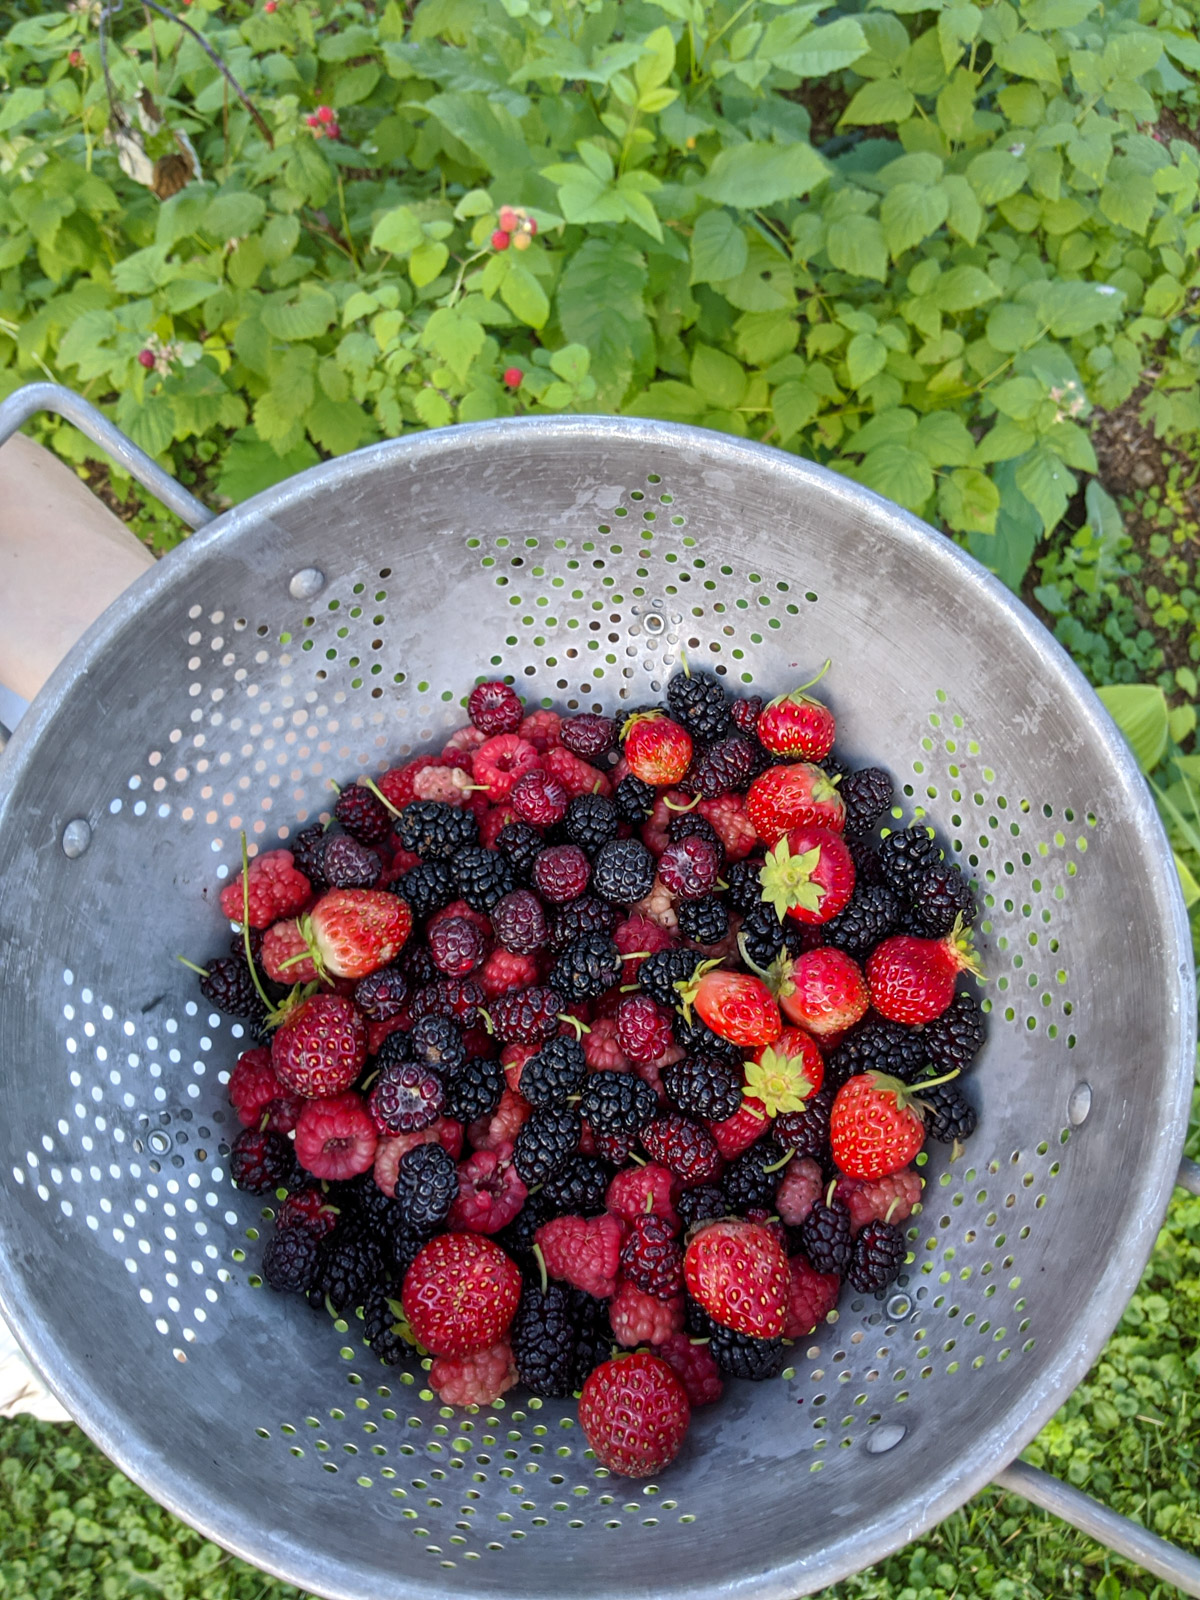 A metal colander full of a mixture of fresh picked berries.